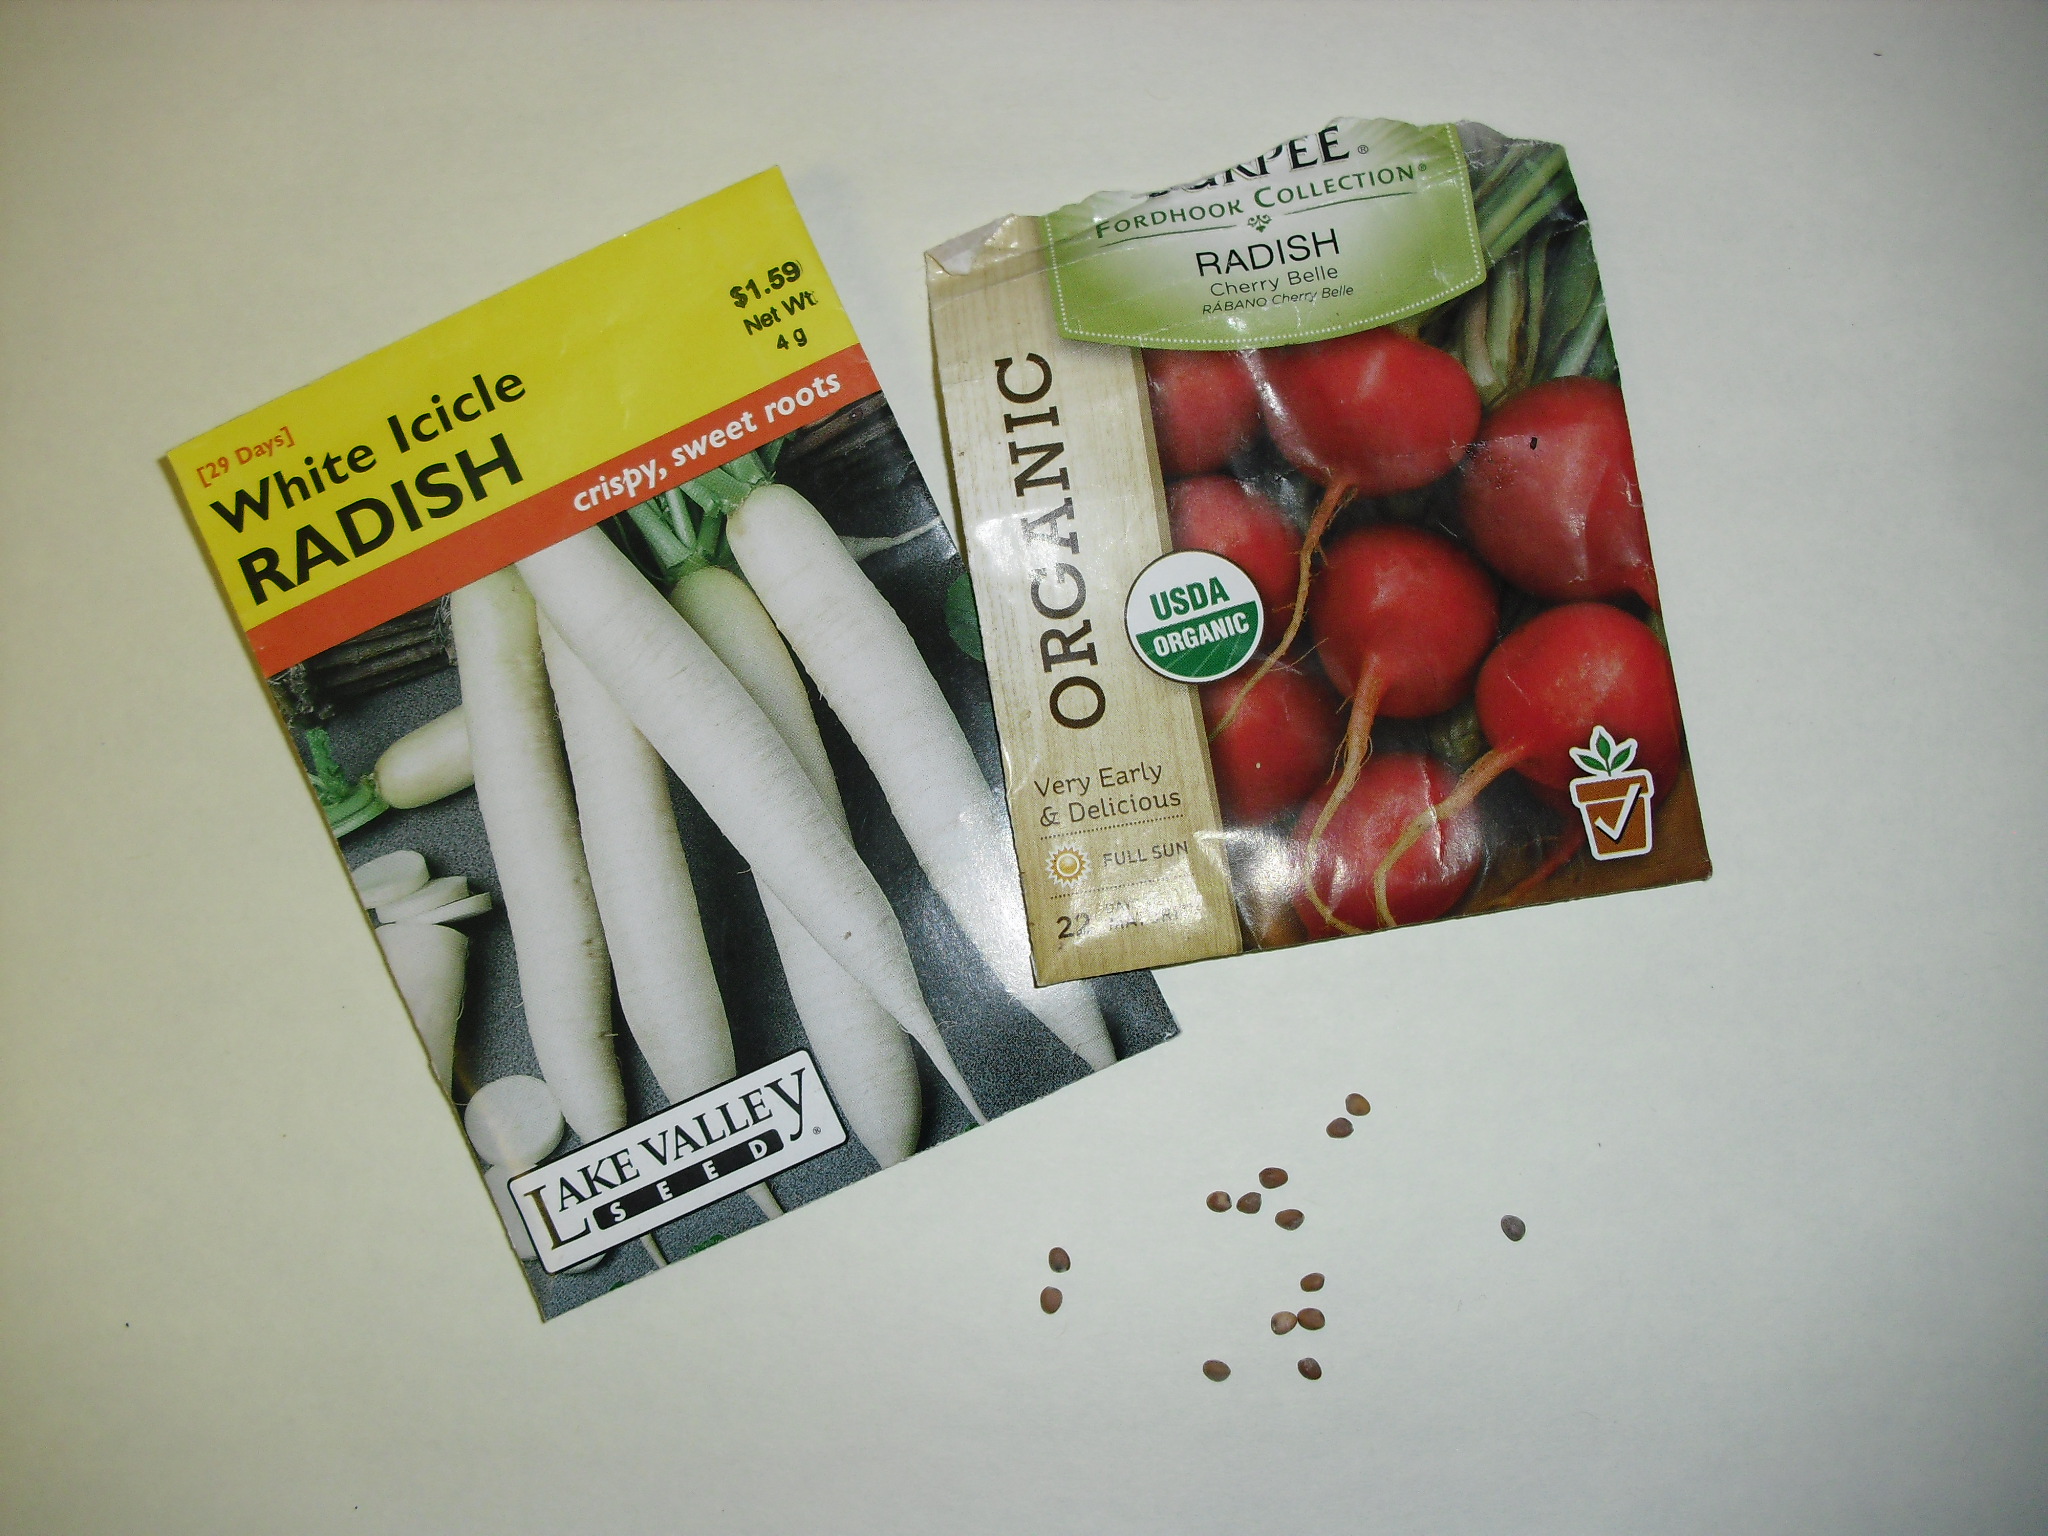 PHOTO: Seed packets for White icicle radish and an organic red radish are shown, next to about a dozen scattered radish seeds from the open package.